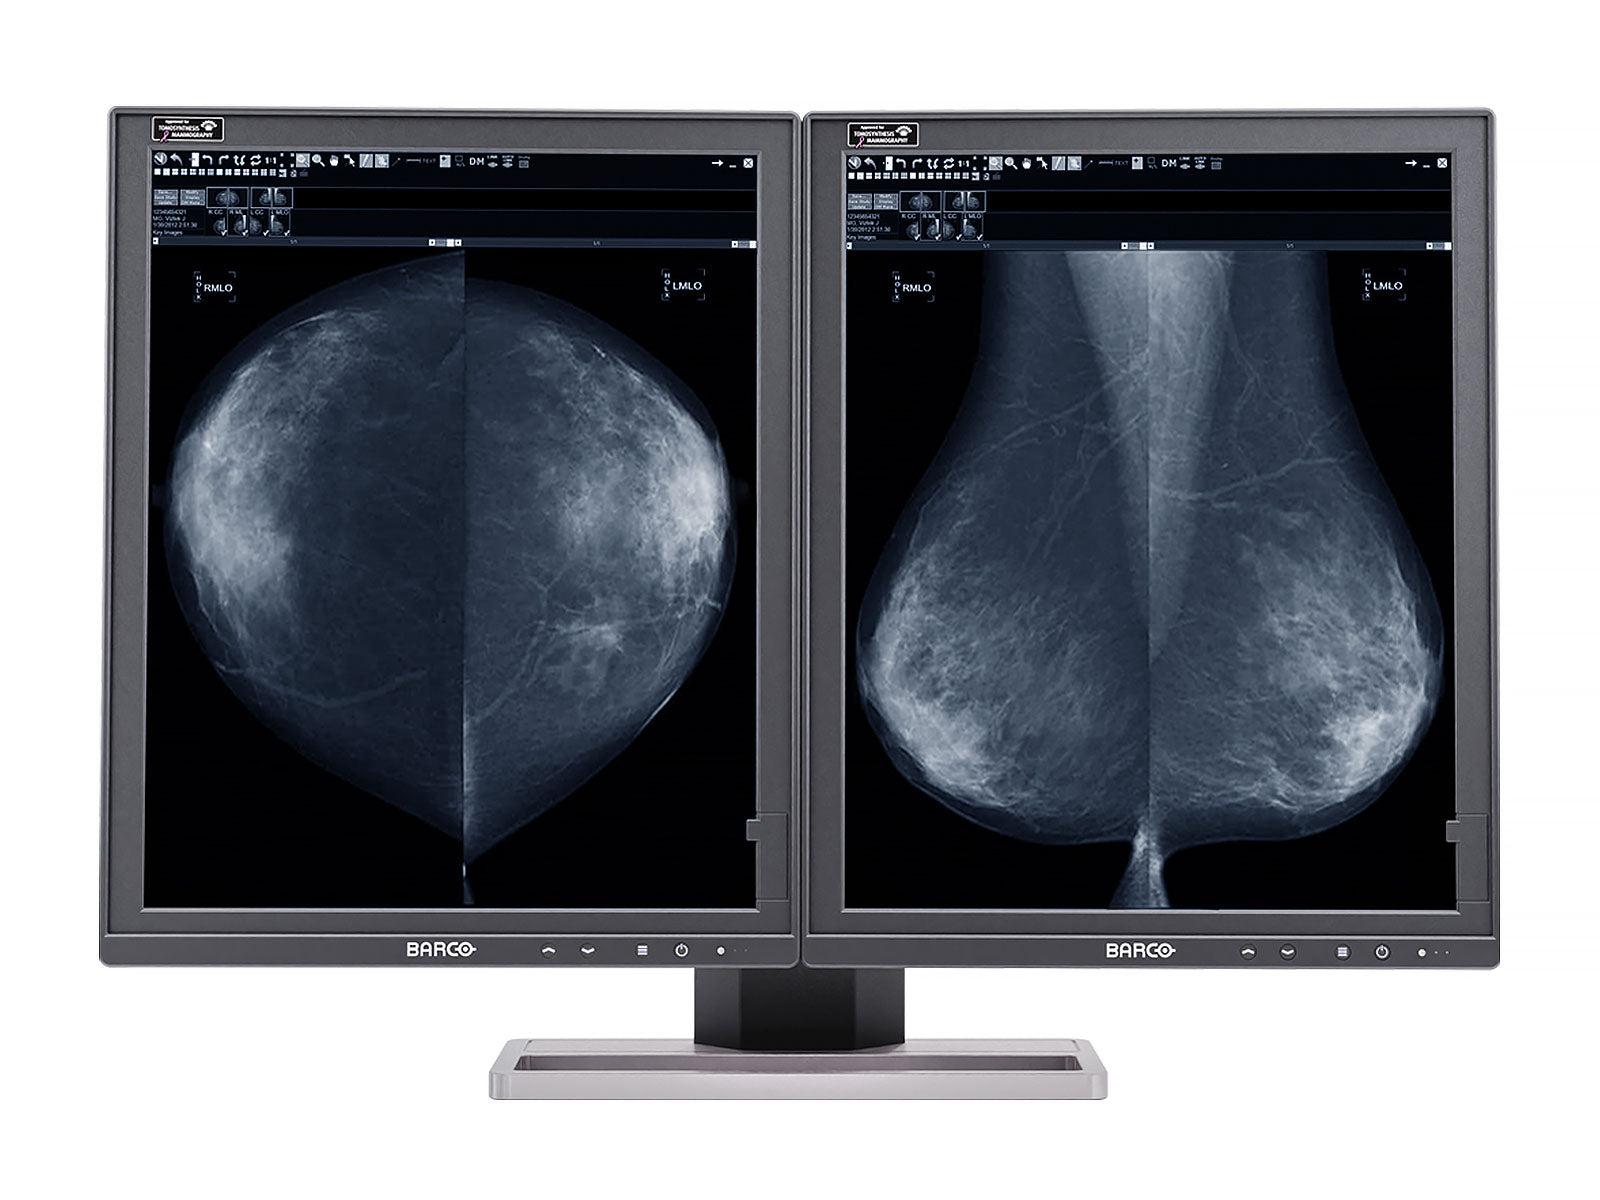 Barco Coronis MDMG-5221 5MP 21" Grayscale Tomosynthesis 3D-DBT Mammography Display (K9300520)